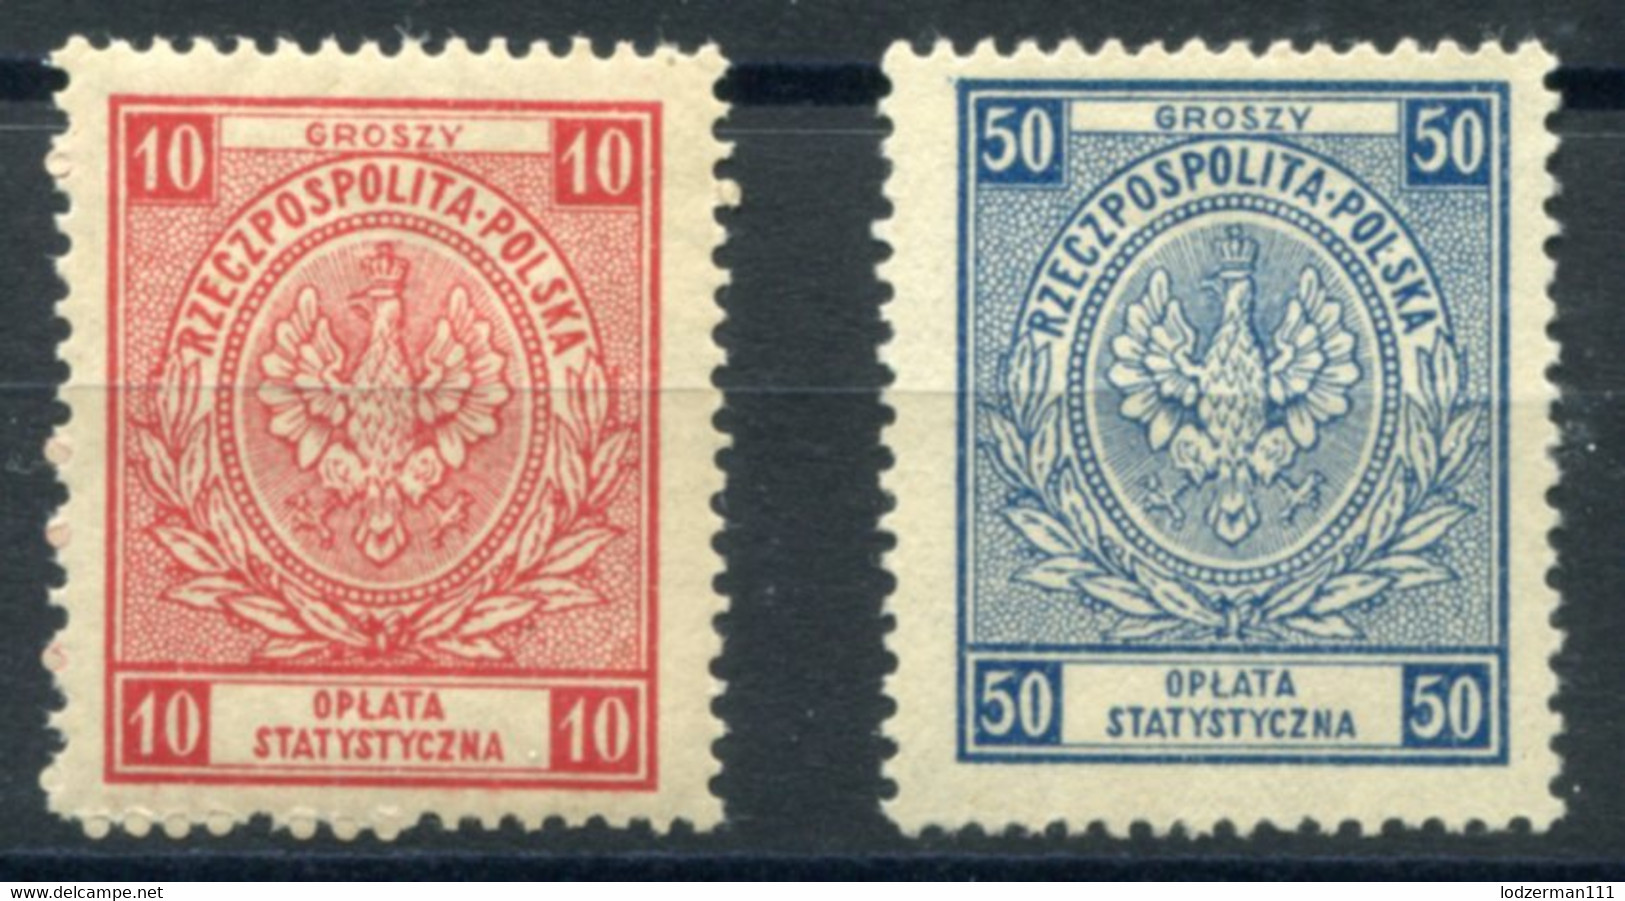 1936 Statistic Fees - 2 Unused Stamps (MNH-MNG) - Revenue Stamps